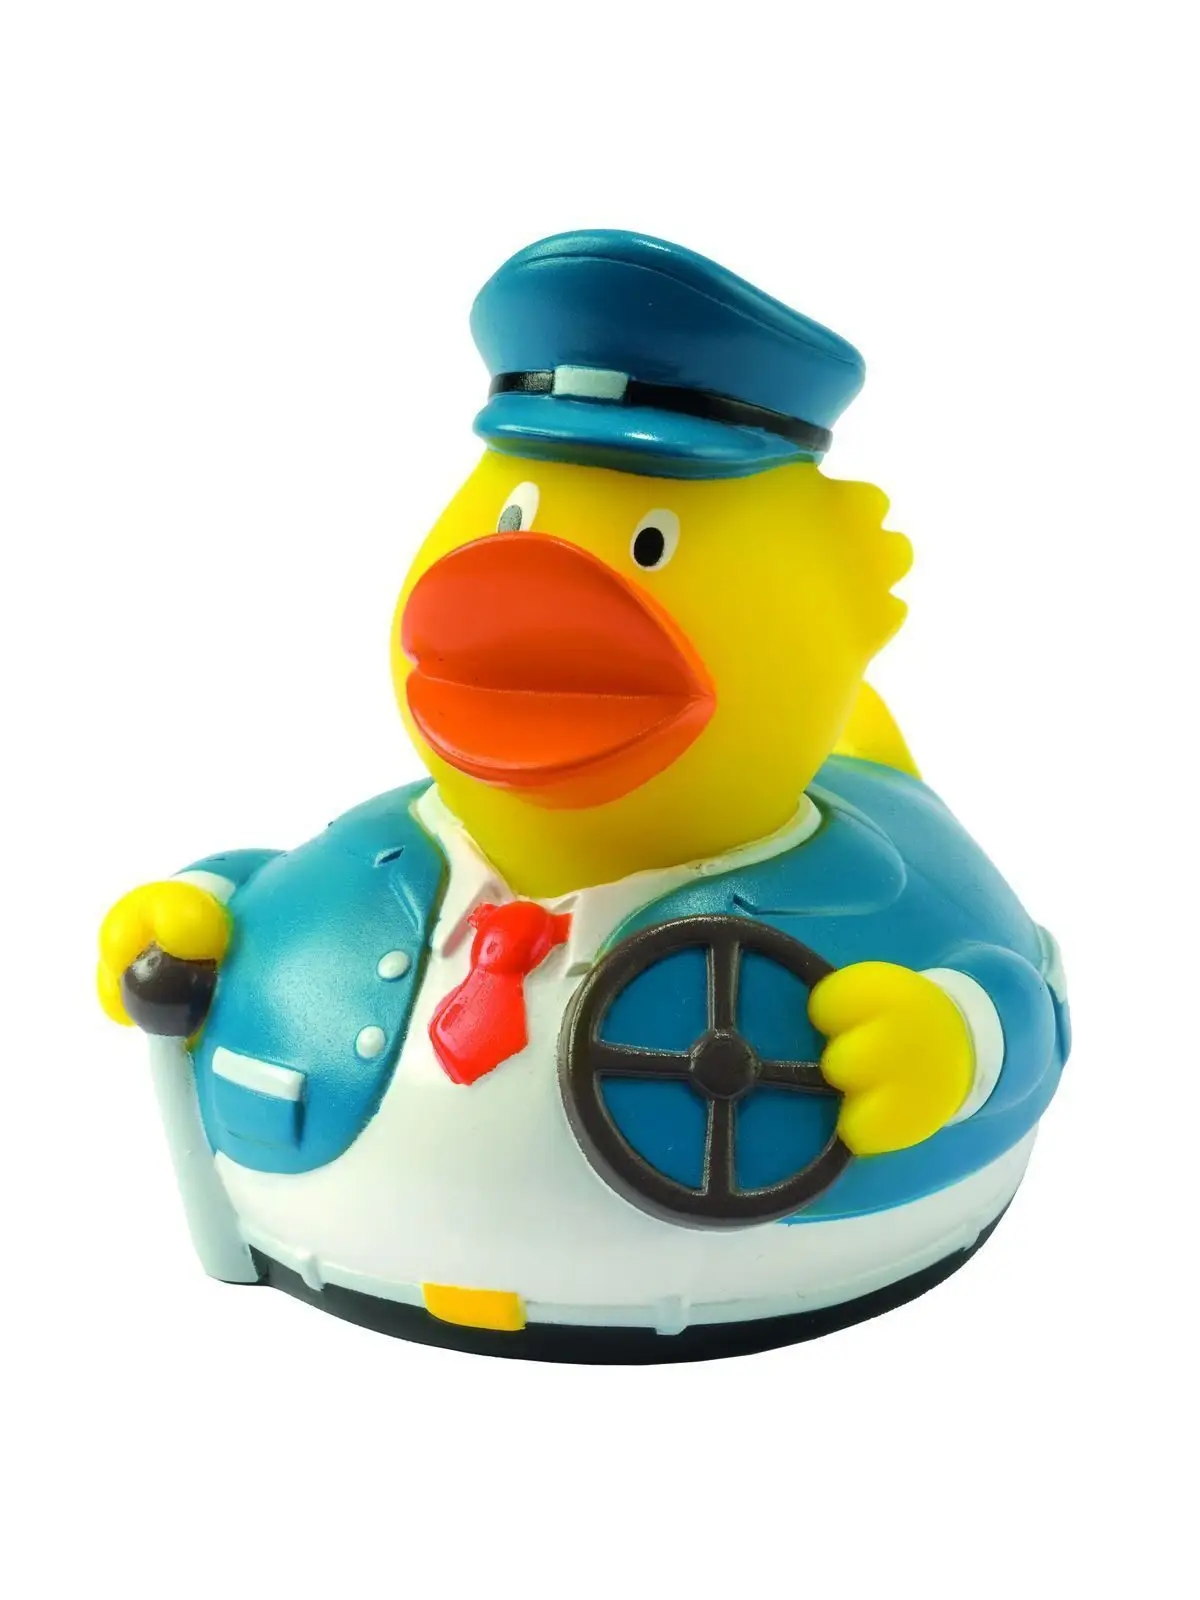 squeaky duck, bus driver